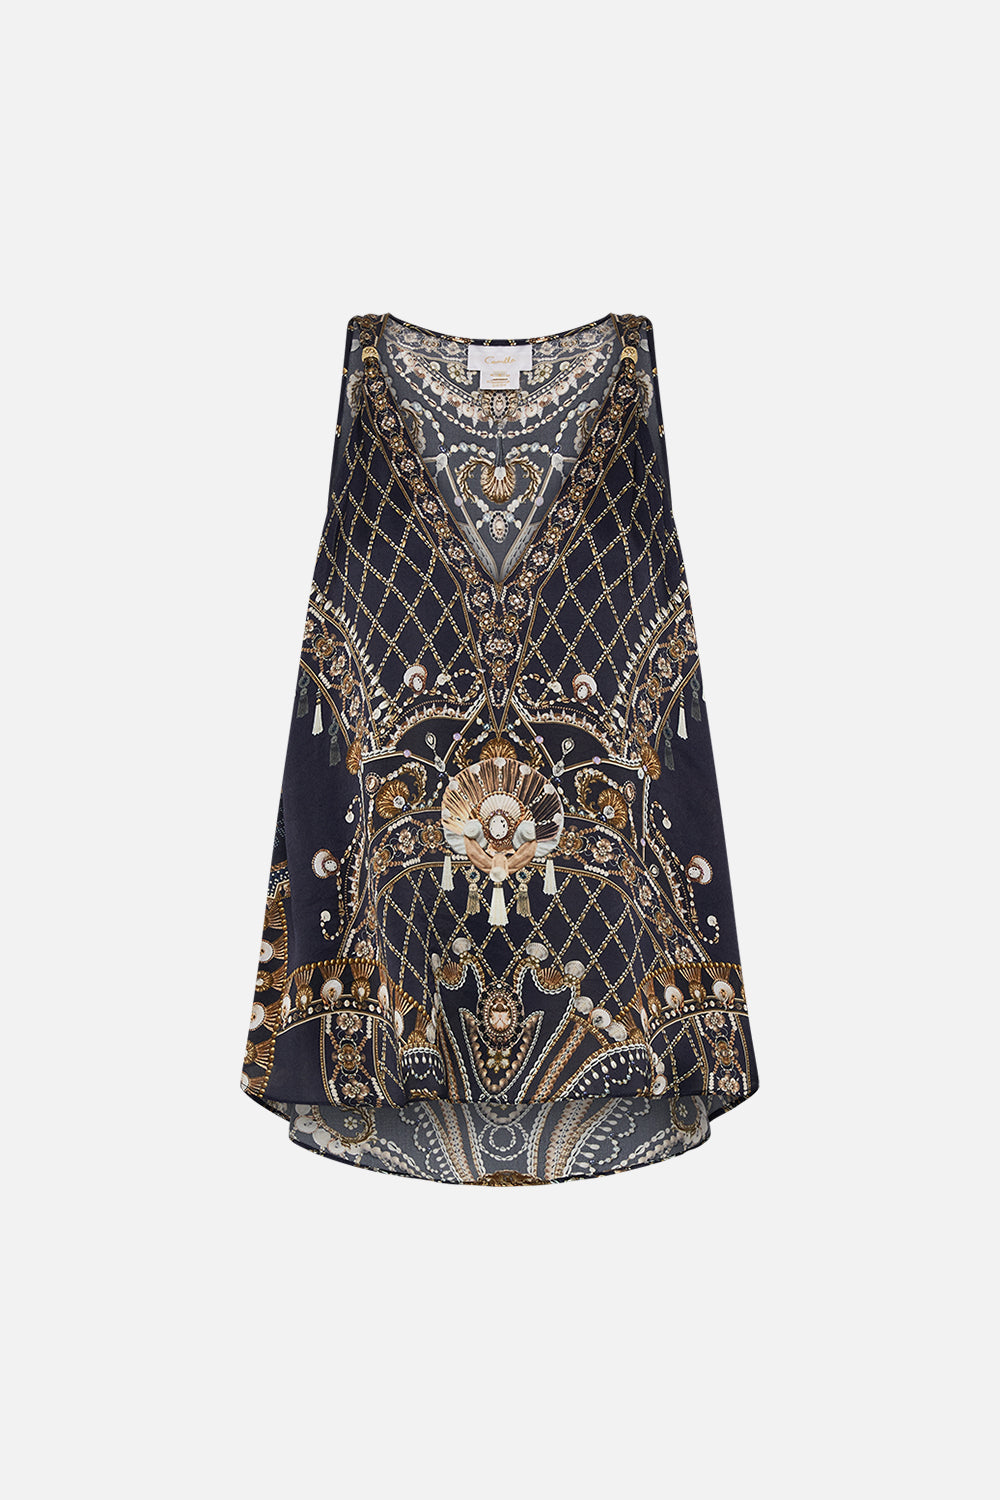 CAMILLA Gold Tank Top with Strap Bead Detail in Dance with the Duke print